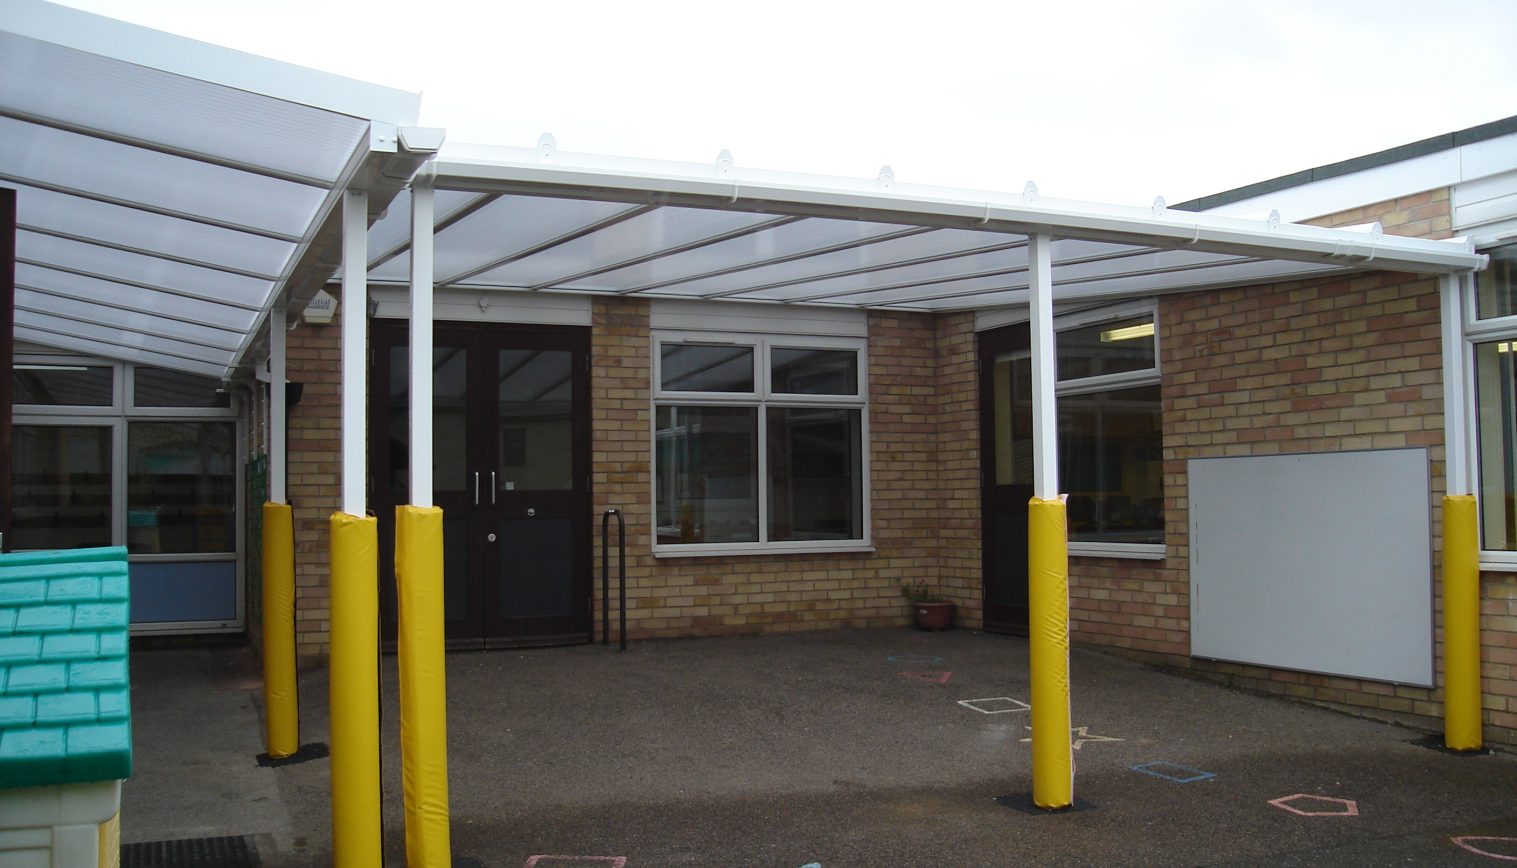 Overhills Primary School – Two Wall Mounted Canopies